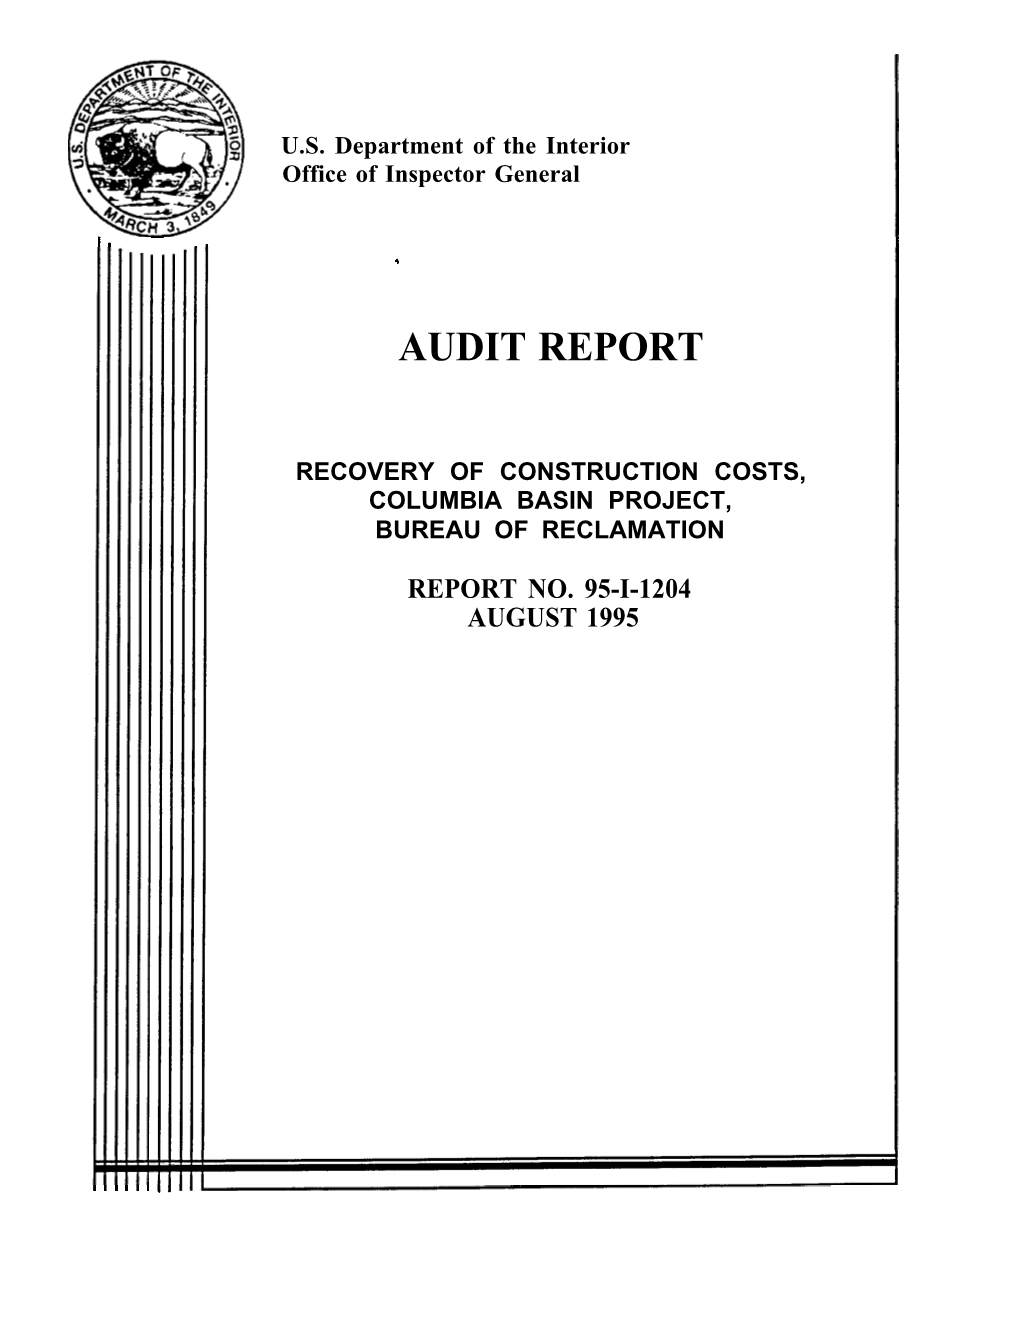 Recovery of Construction Costs, Columbia Basin Project, Bureau of Reclamation